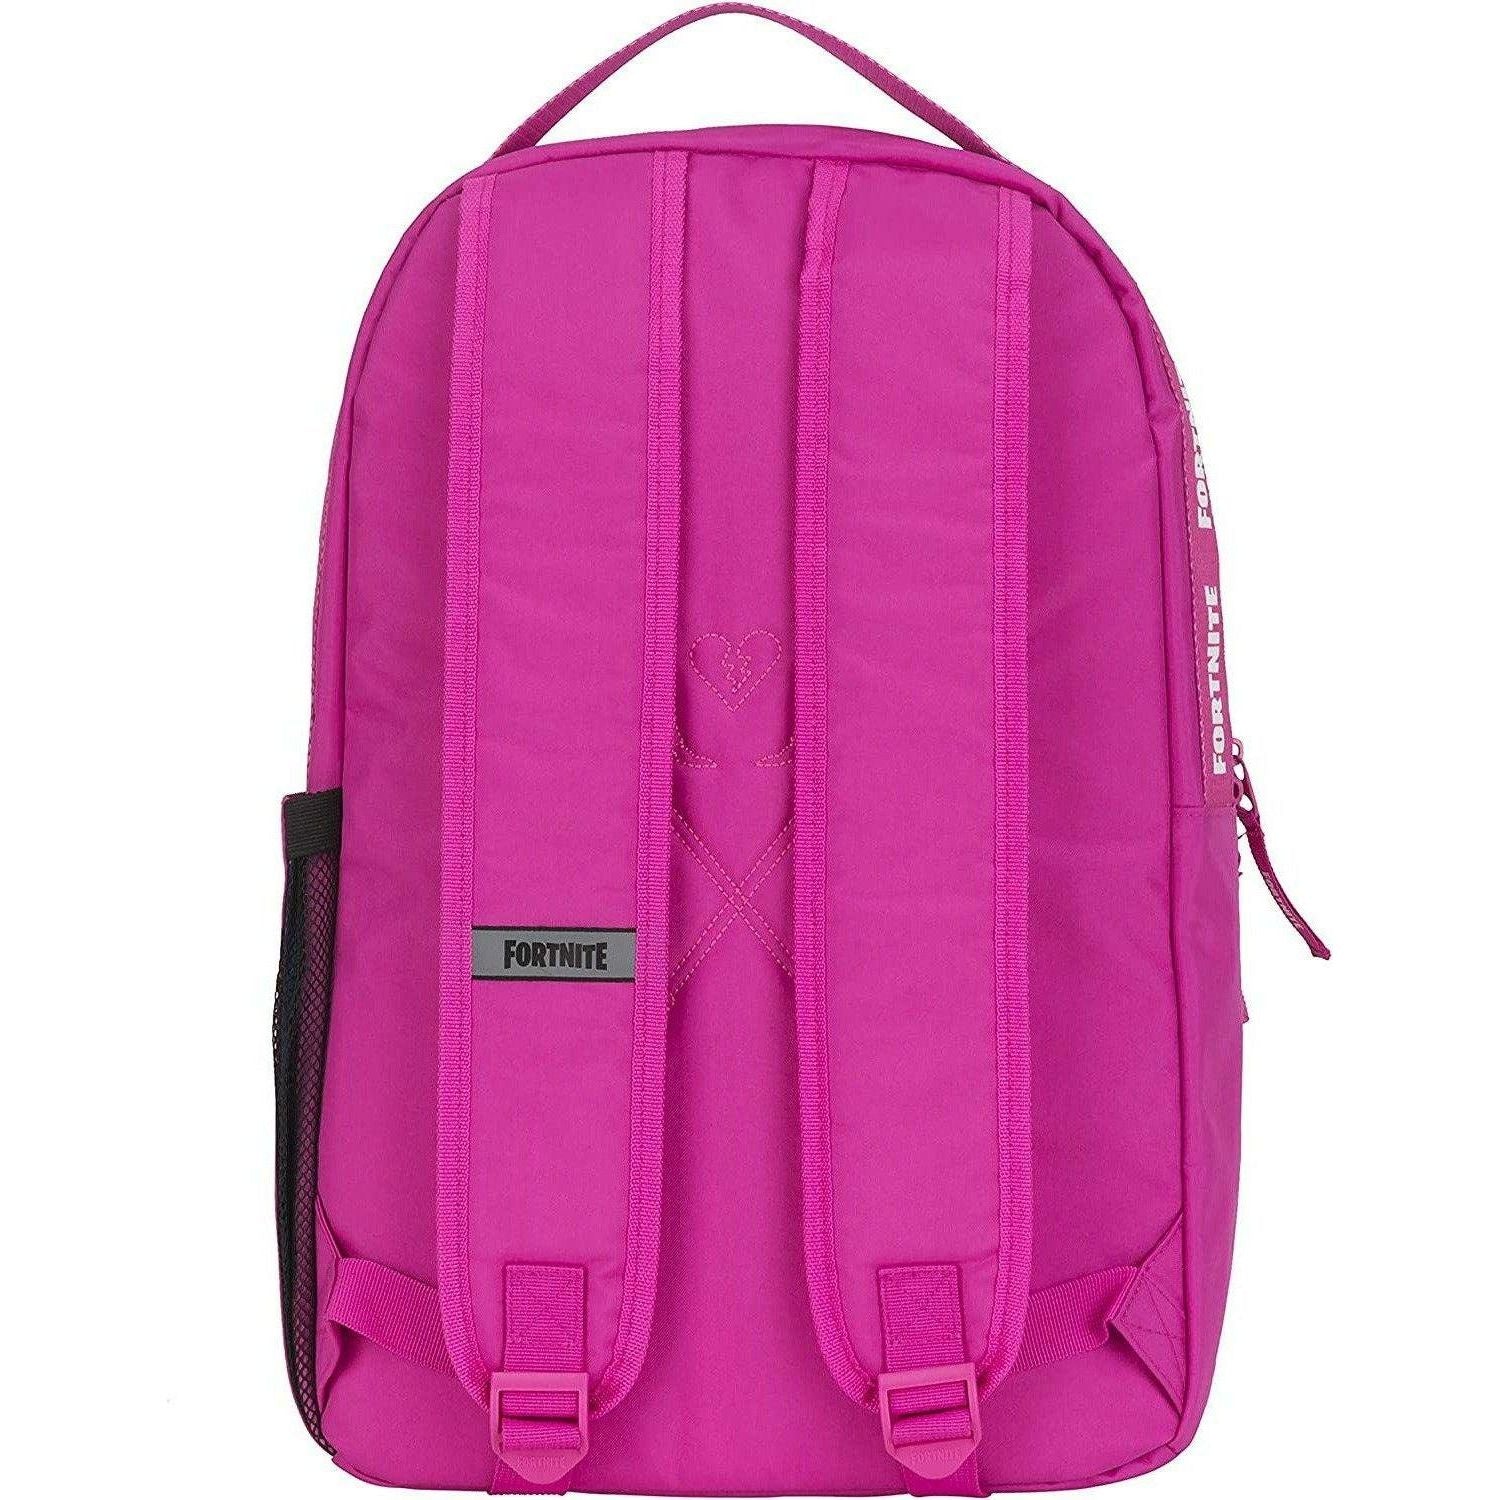 Fortnite Official Profile Backpack Pink - BumbleToys - 6+ Years, Backpack, Bags, Characters, Disney, Girls, School Supplies